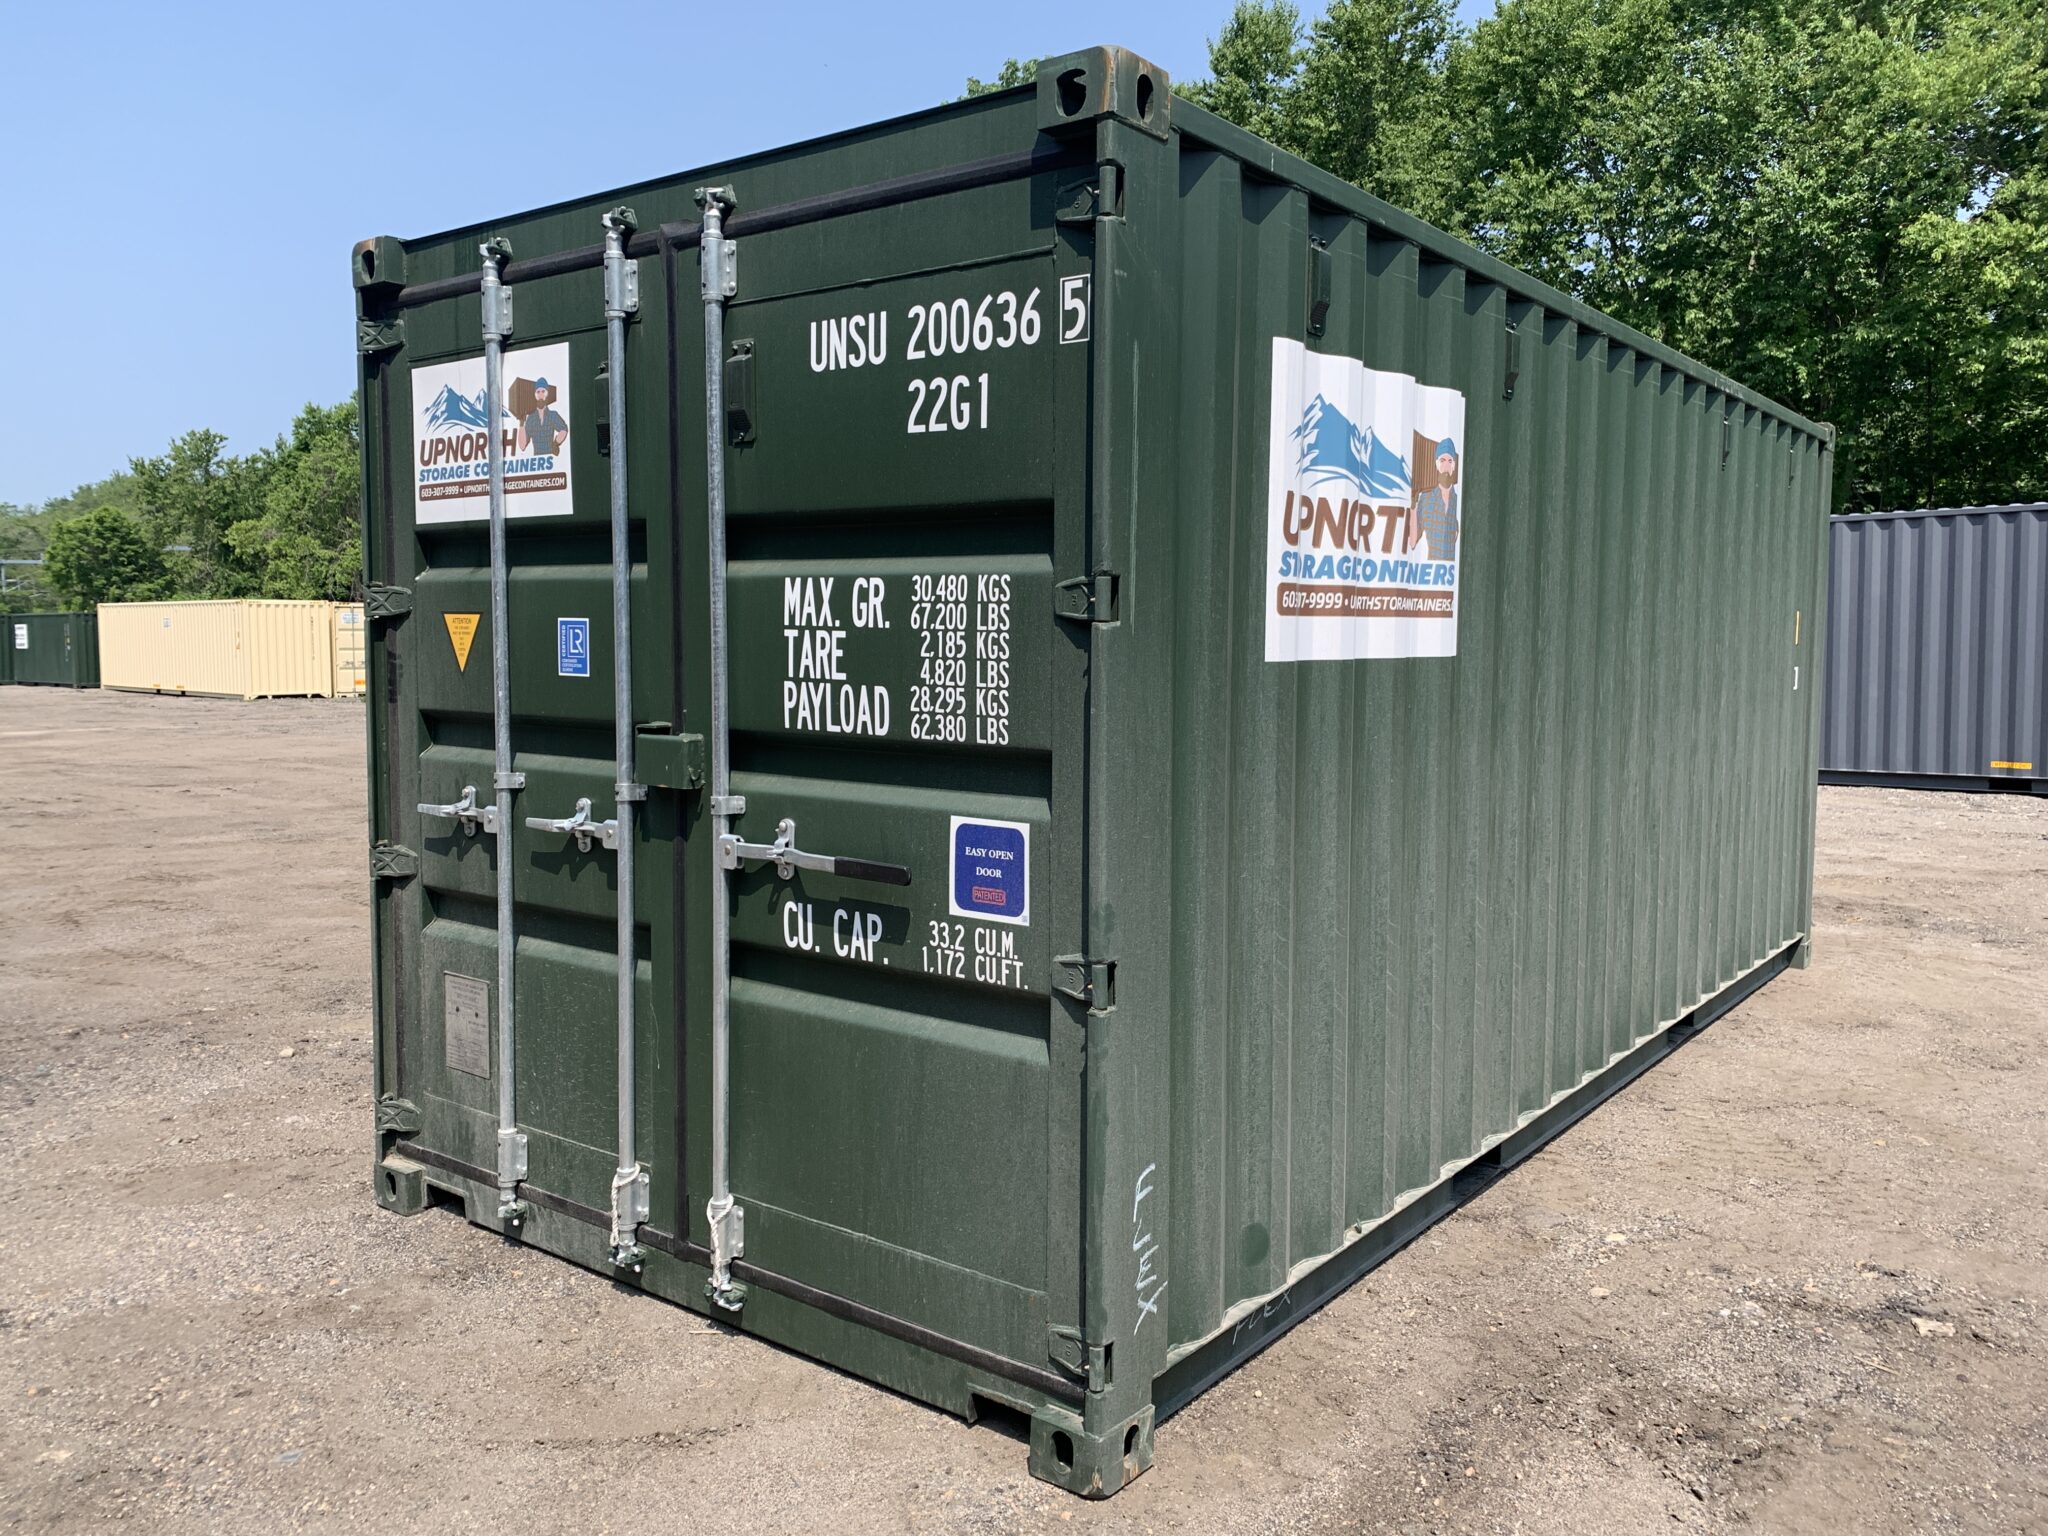 10′ x 8′ x 8.5′ Tall– New Shipping/Storage Container – Wind and Watertight  – BLUE